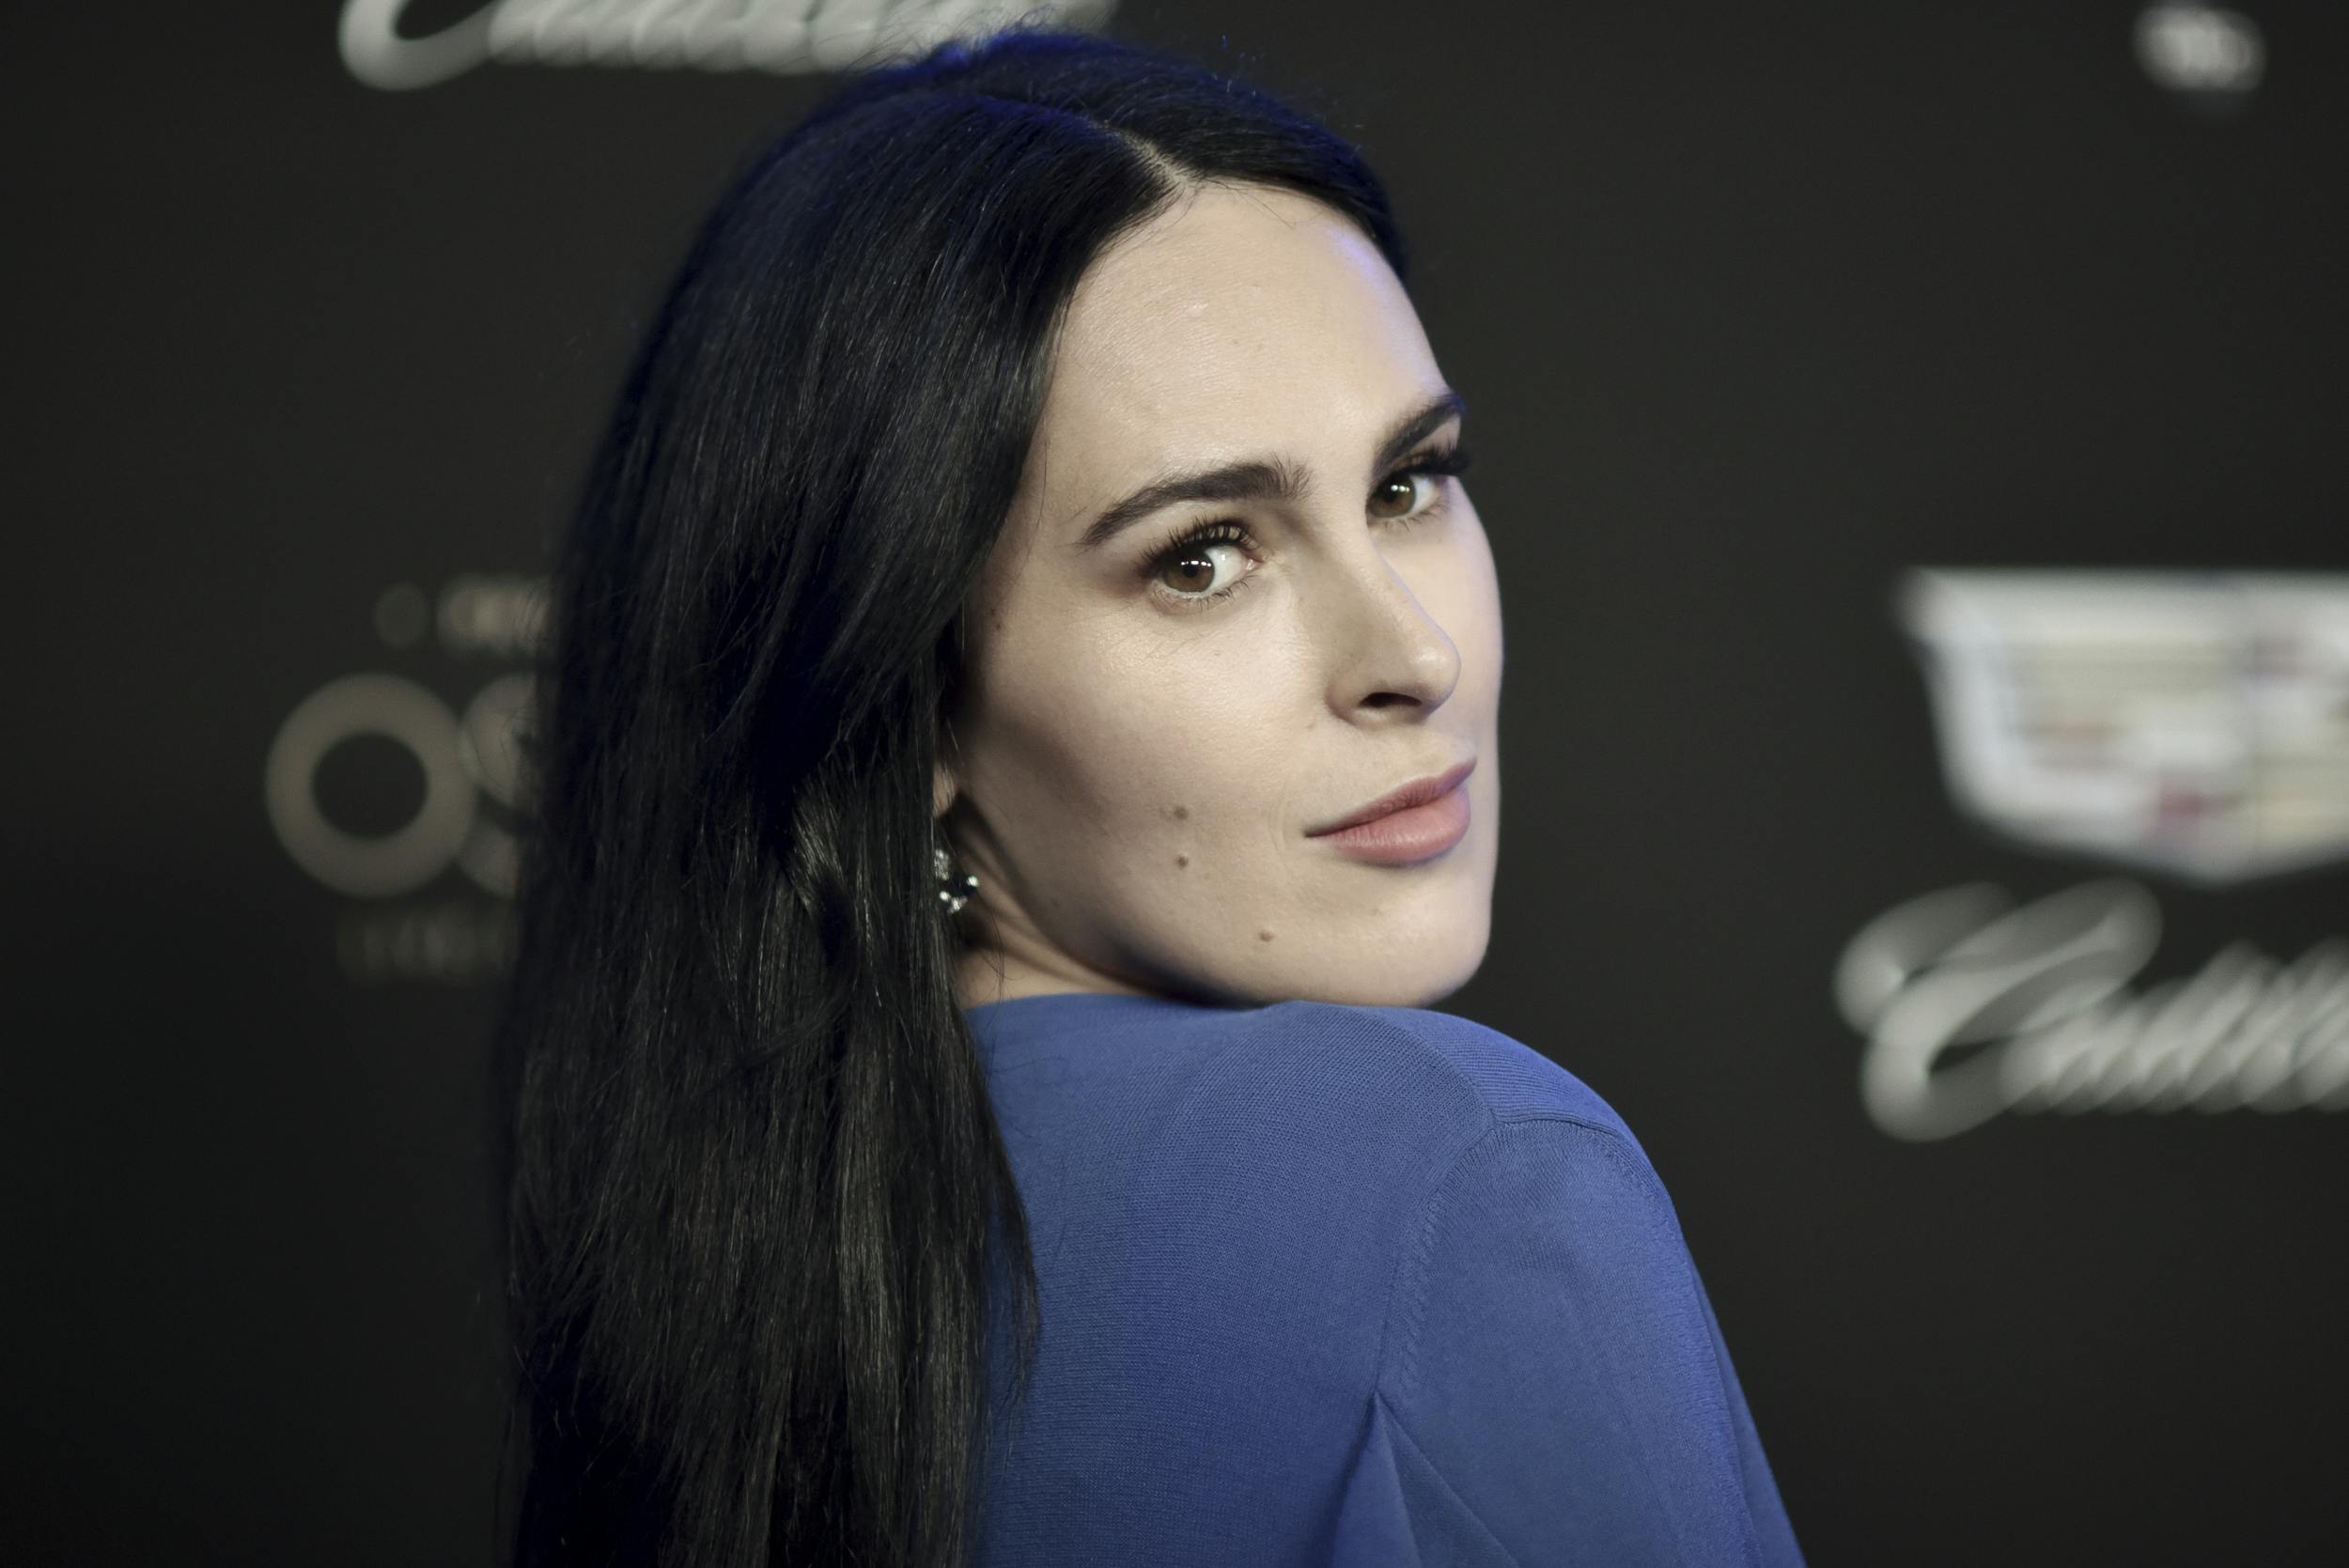 Rumer Willis attends Cadillac's pre-Oscar event at Chateau Marmont on Thursday, Feb. 6, 2020, in Los Angeles. (Photo by Richard Shotwell/Invision/AP)